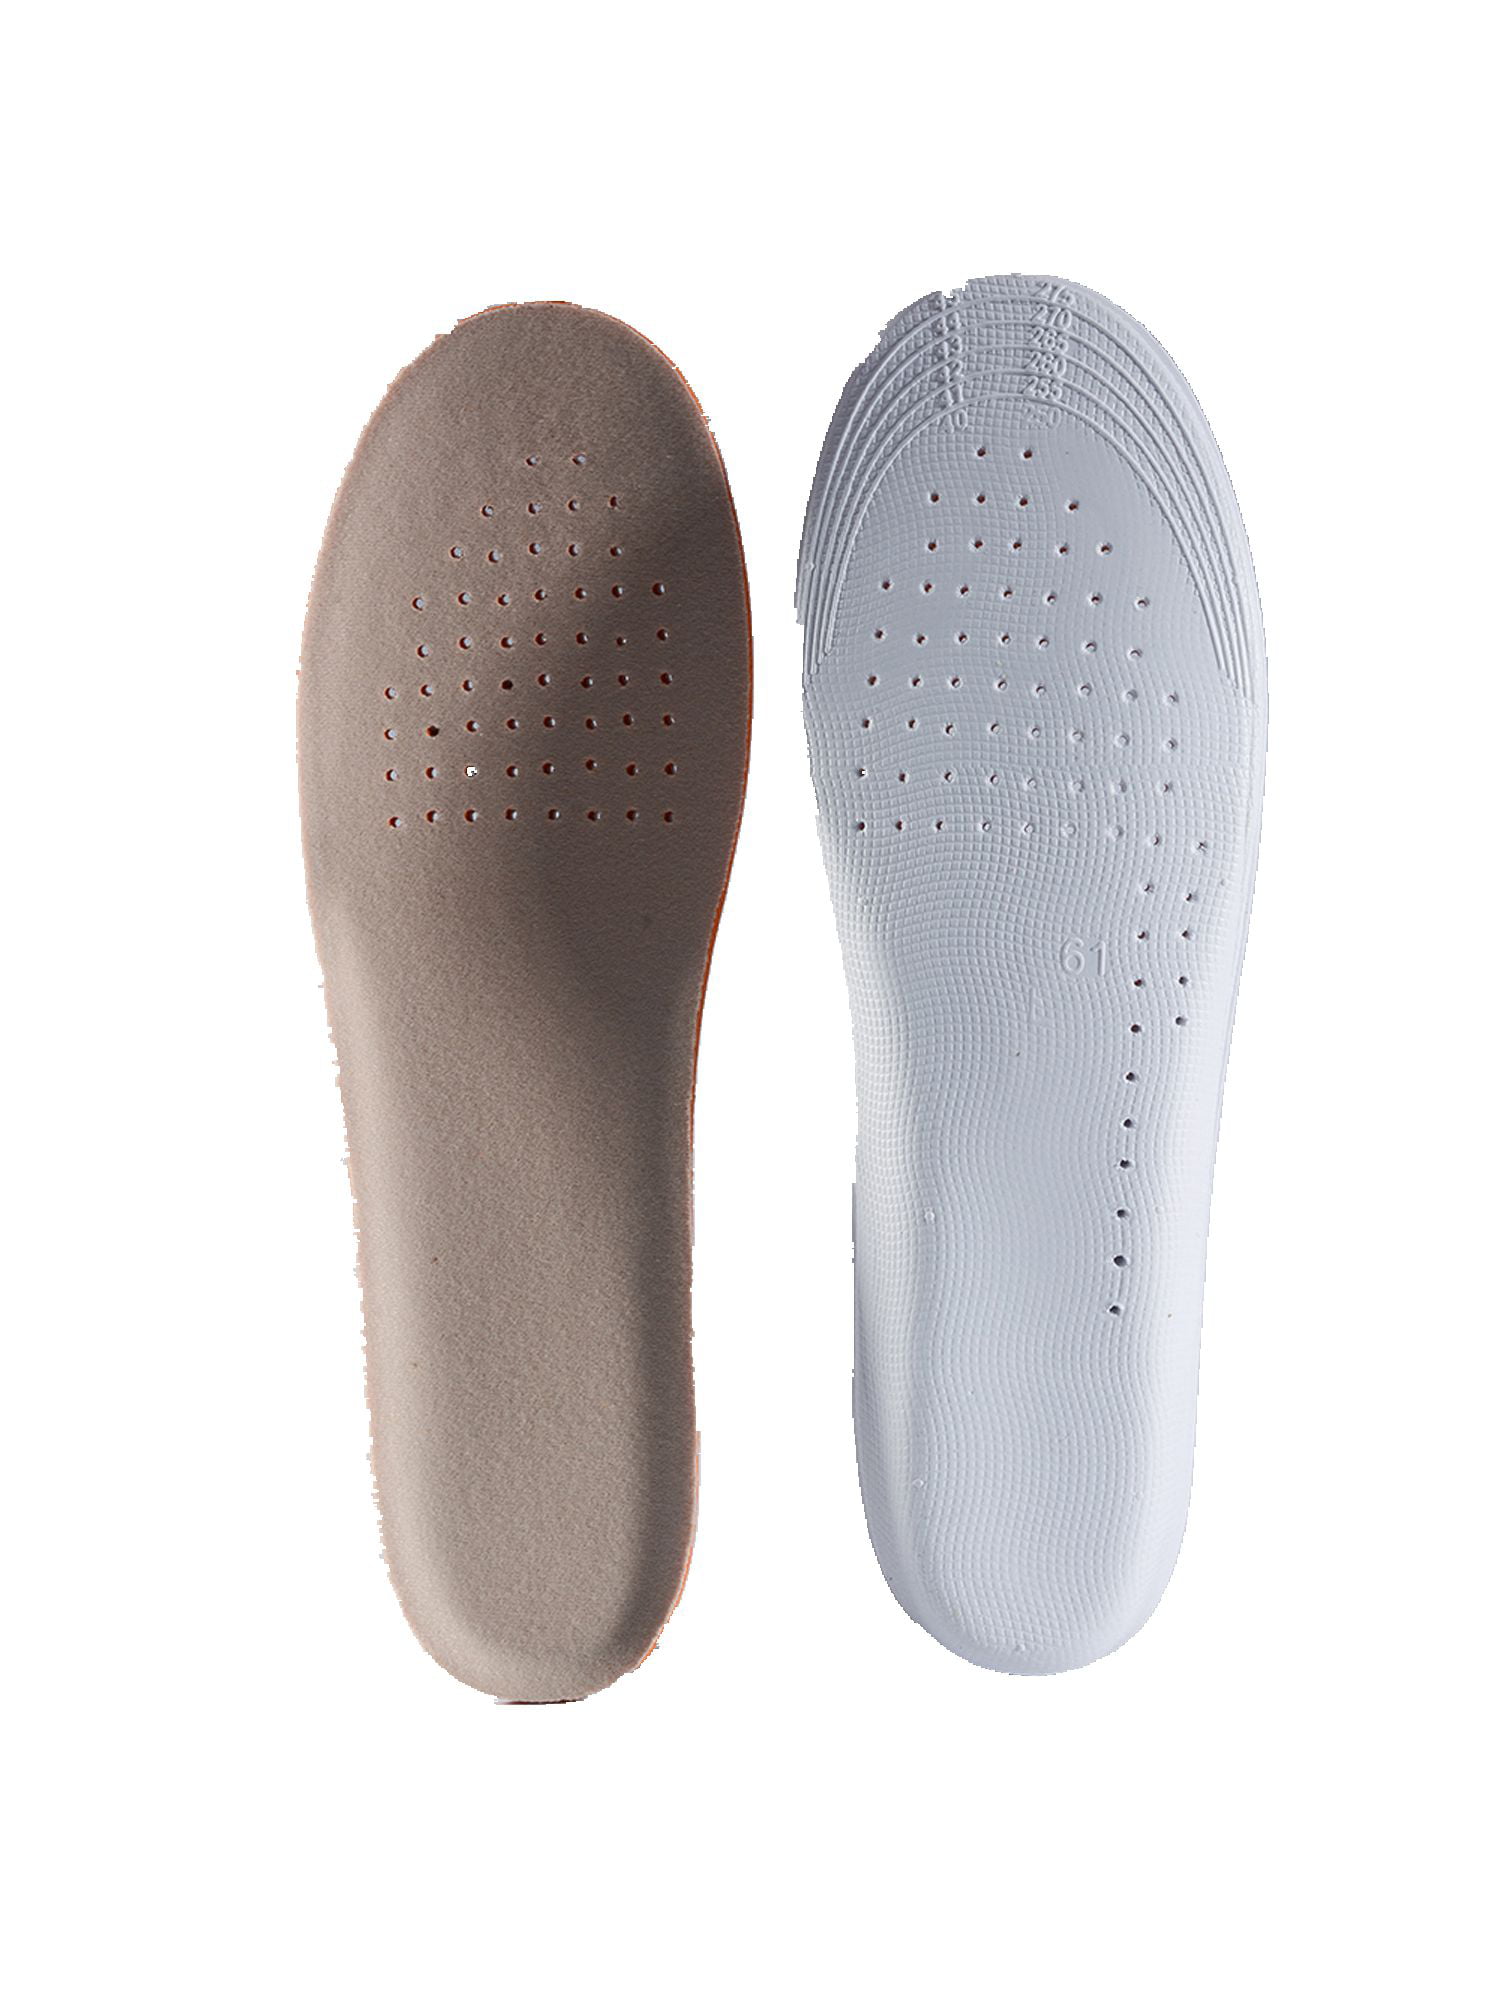 Wholesale Height Increase Insole Taller Breathable Invisible Increased  Insole Shoe Lifts Shoe Pads Elevator Insoles HA00631 From m.alibaba.com